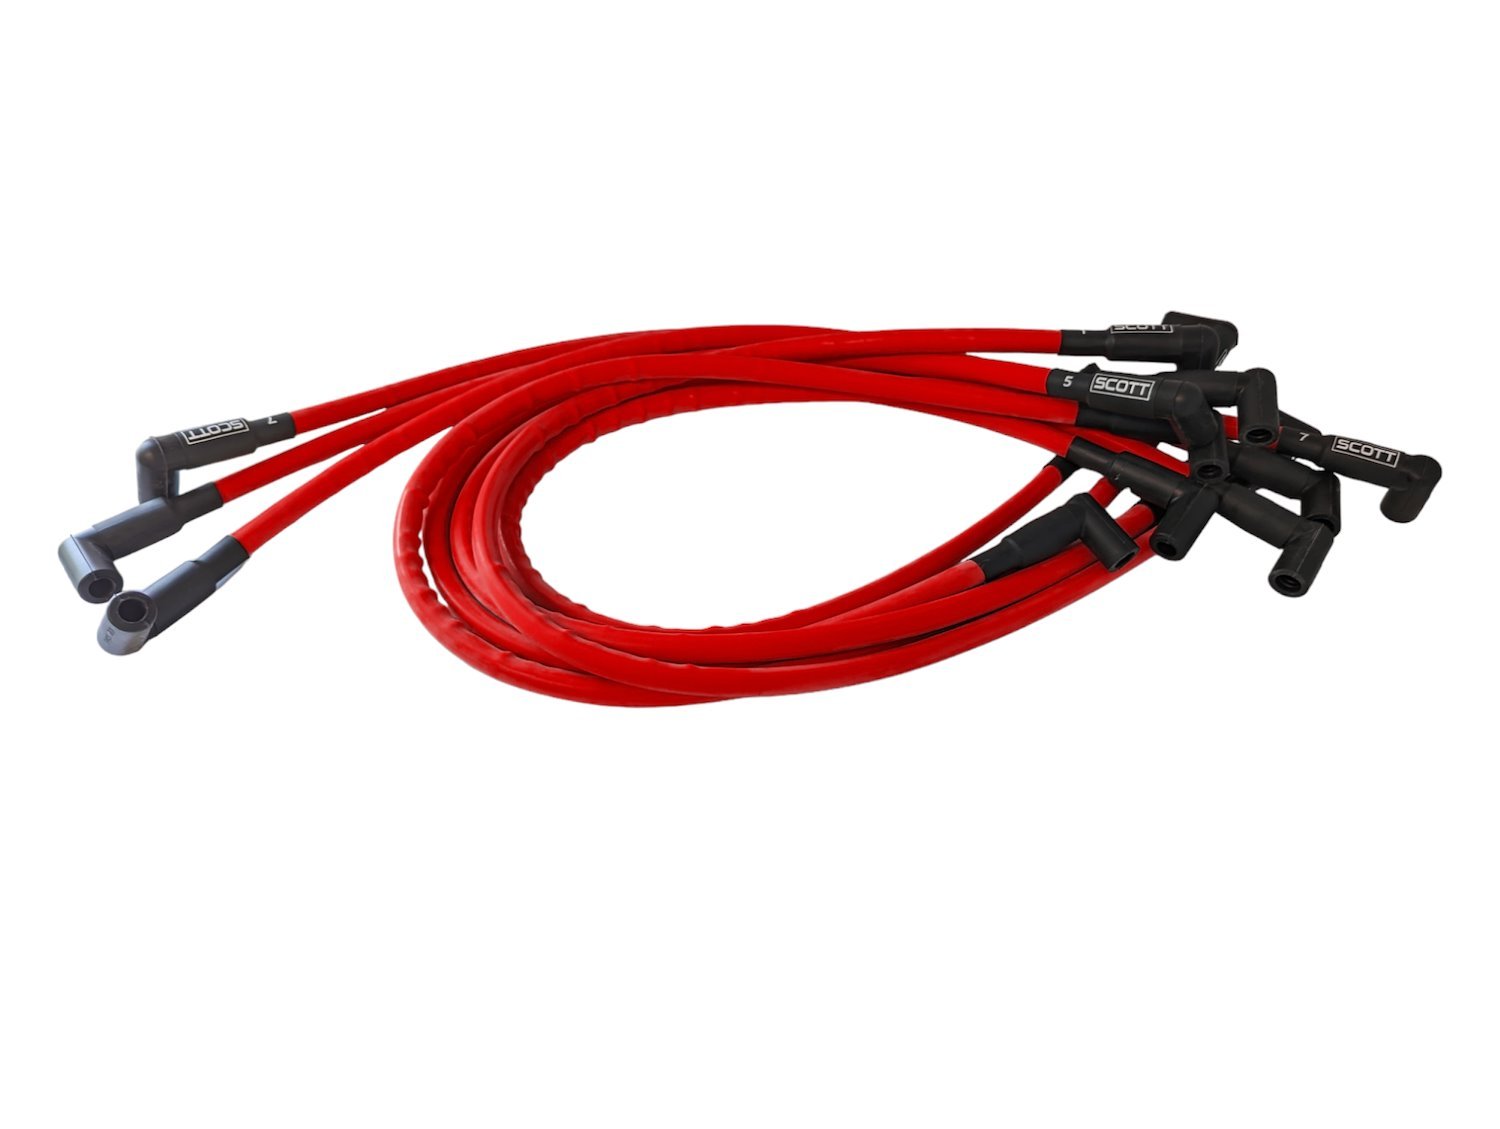 SPW-CH-402-2 High-Performance Silicone-Sleeved Spark Plug Wire Set for Small Block Chevy, Over Valve Cover [Red]